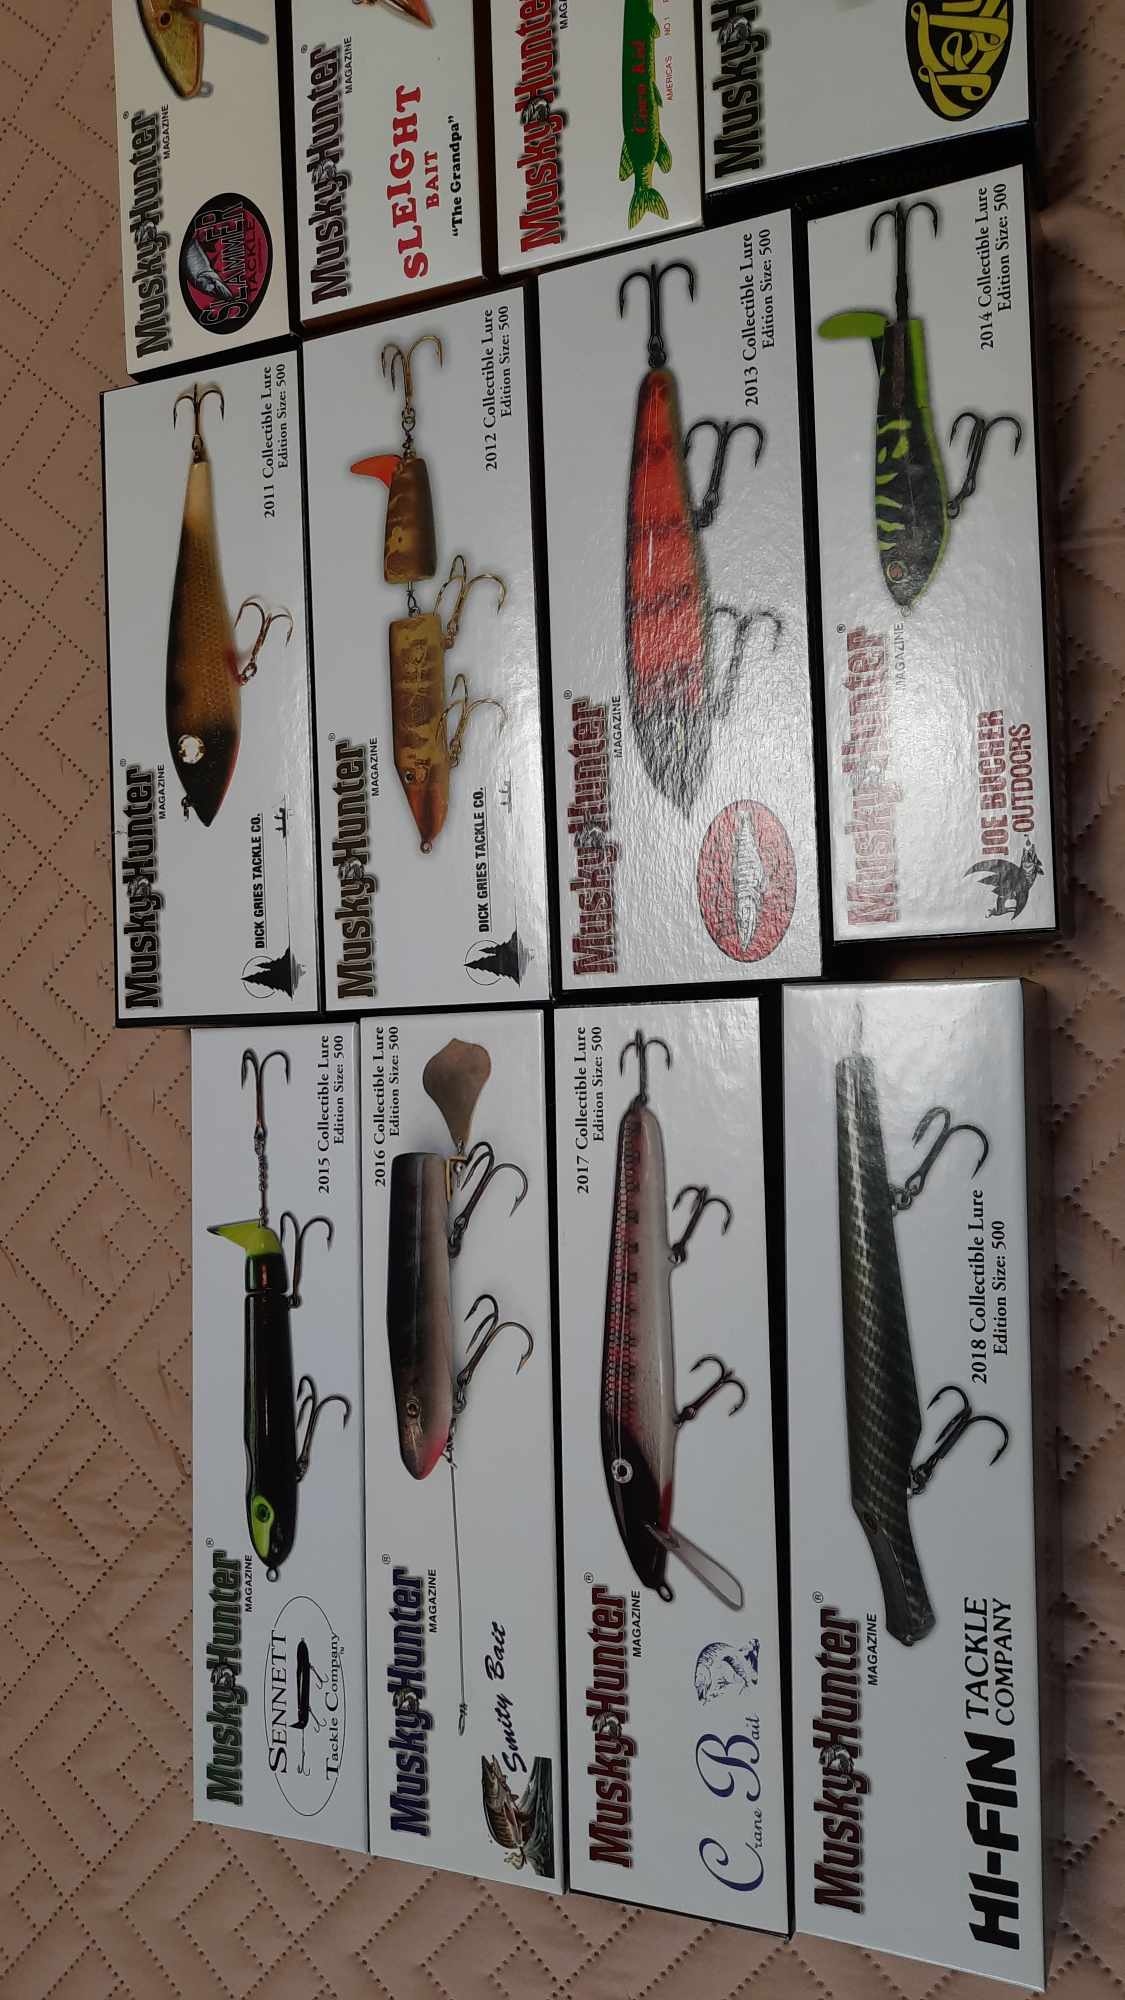 https://muskie.outdoorsfirst.com/board/forums/get-attachment.asp?attachmentid=153606